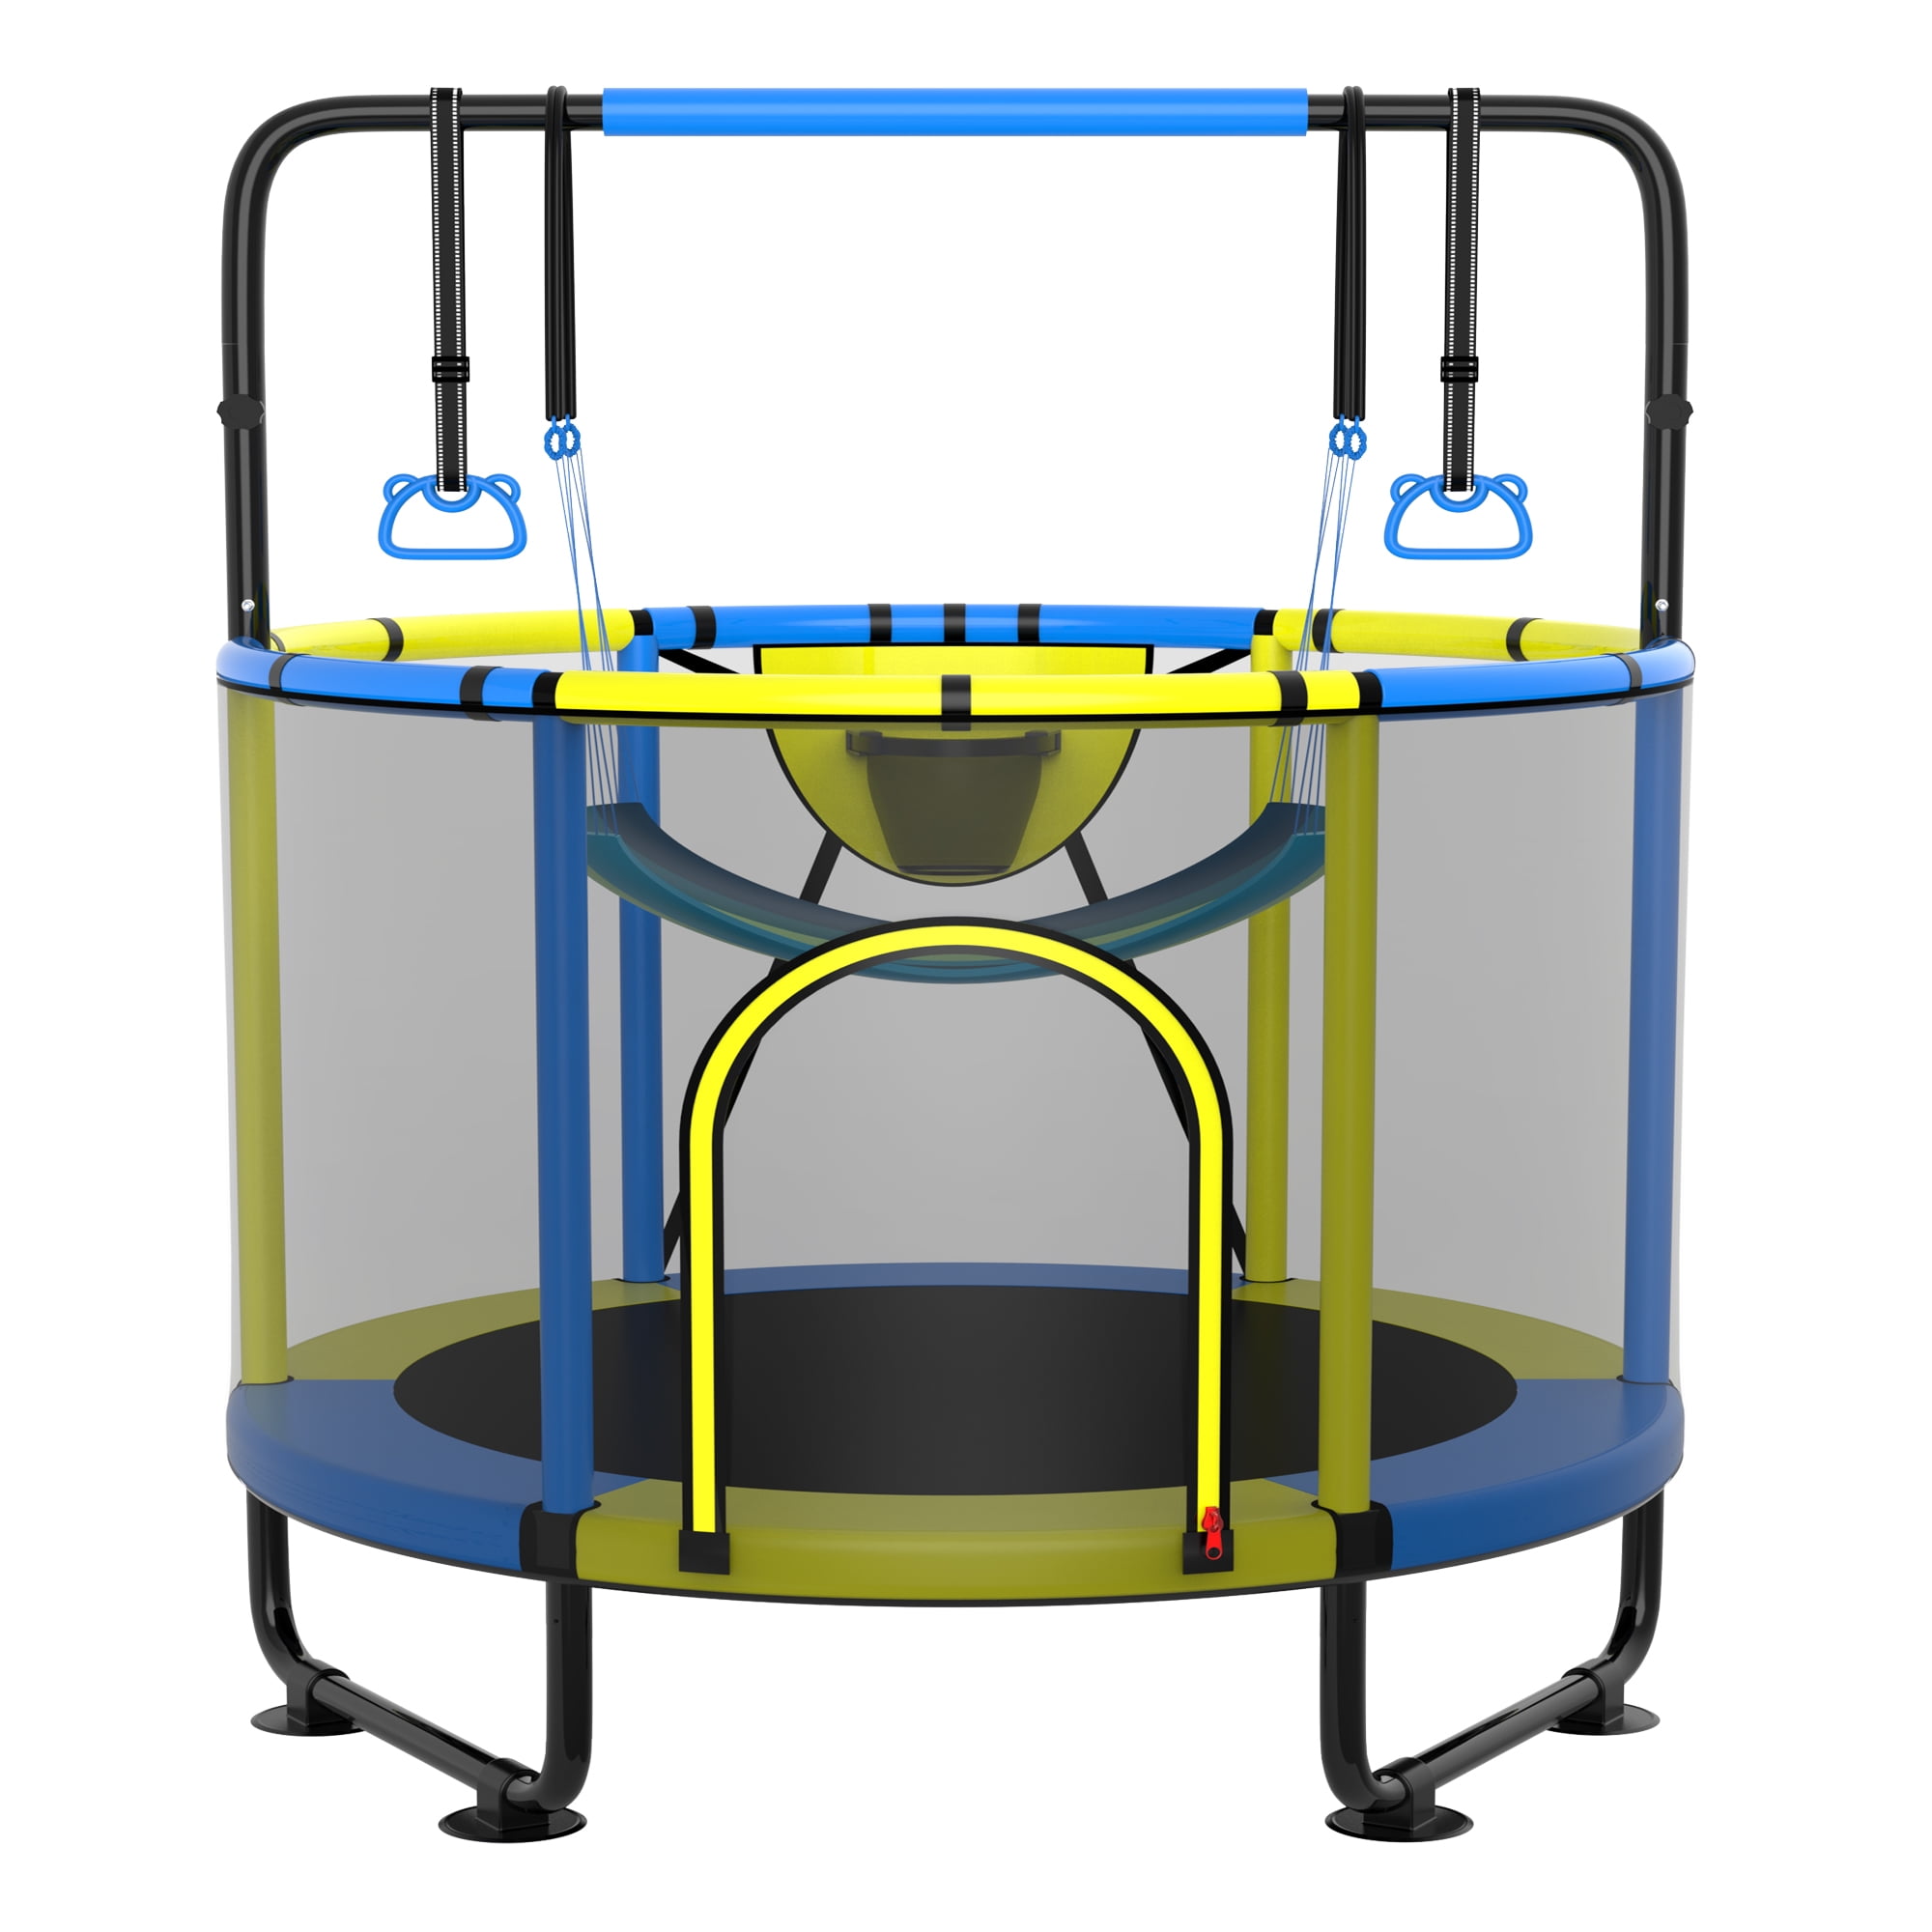 Kumix 60'' Trampoline for Kids, 440LBS Indoor/Outdoor Trampoline with Enclosure, Basketball Hoop, Mini Toddler Trampoline with Swings, Adjustable Bars and Rings, Gifts for Kids, Toddler, Boys & Girls - image 1 of 7